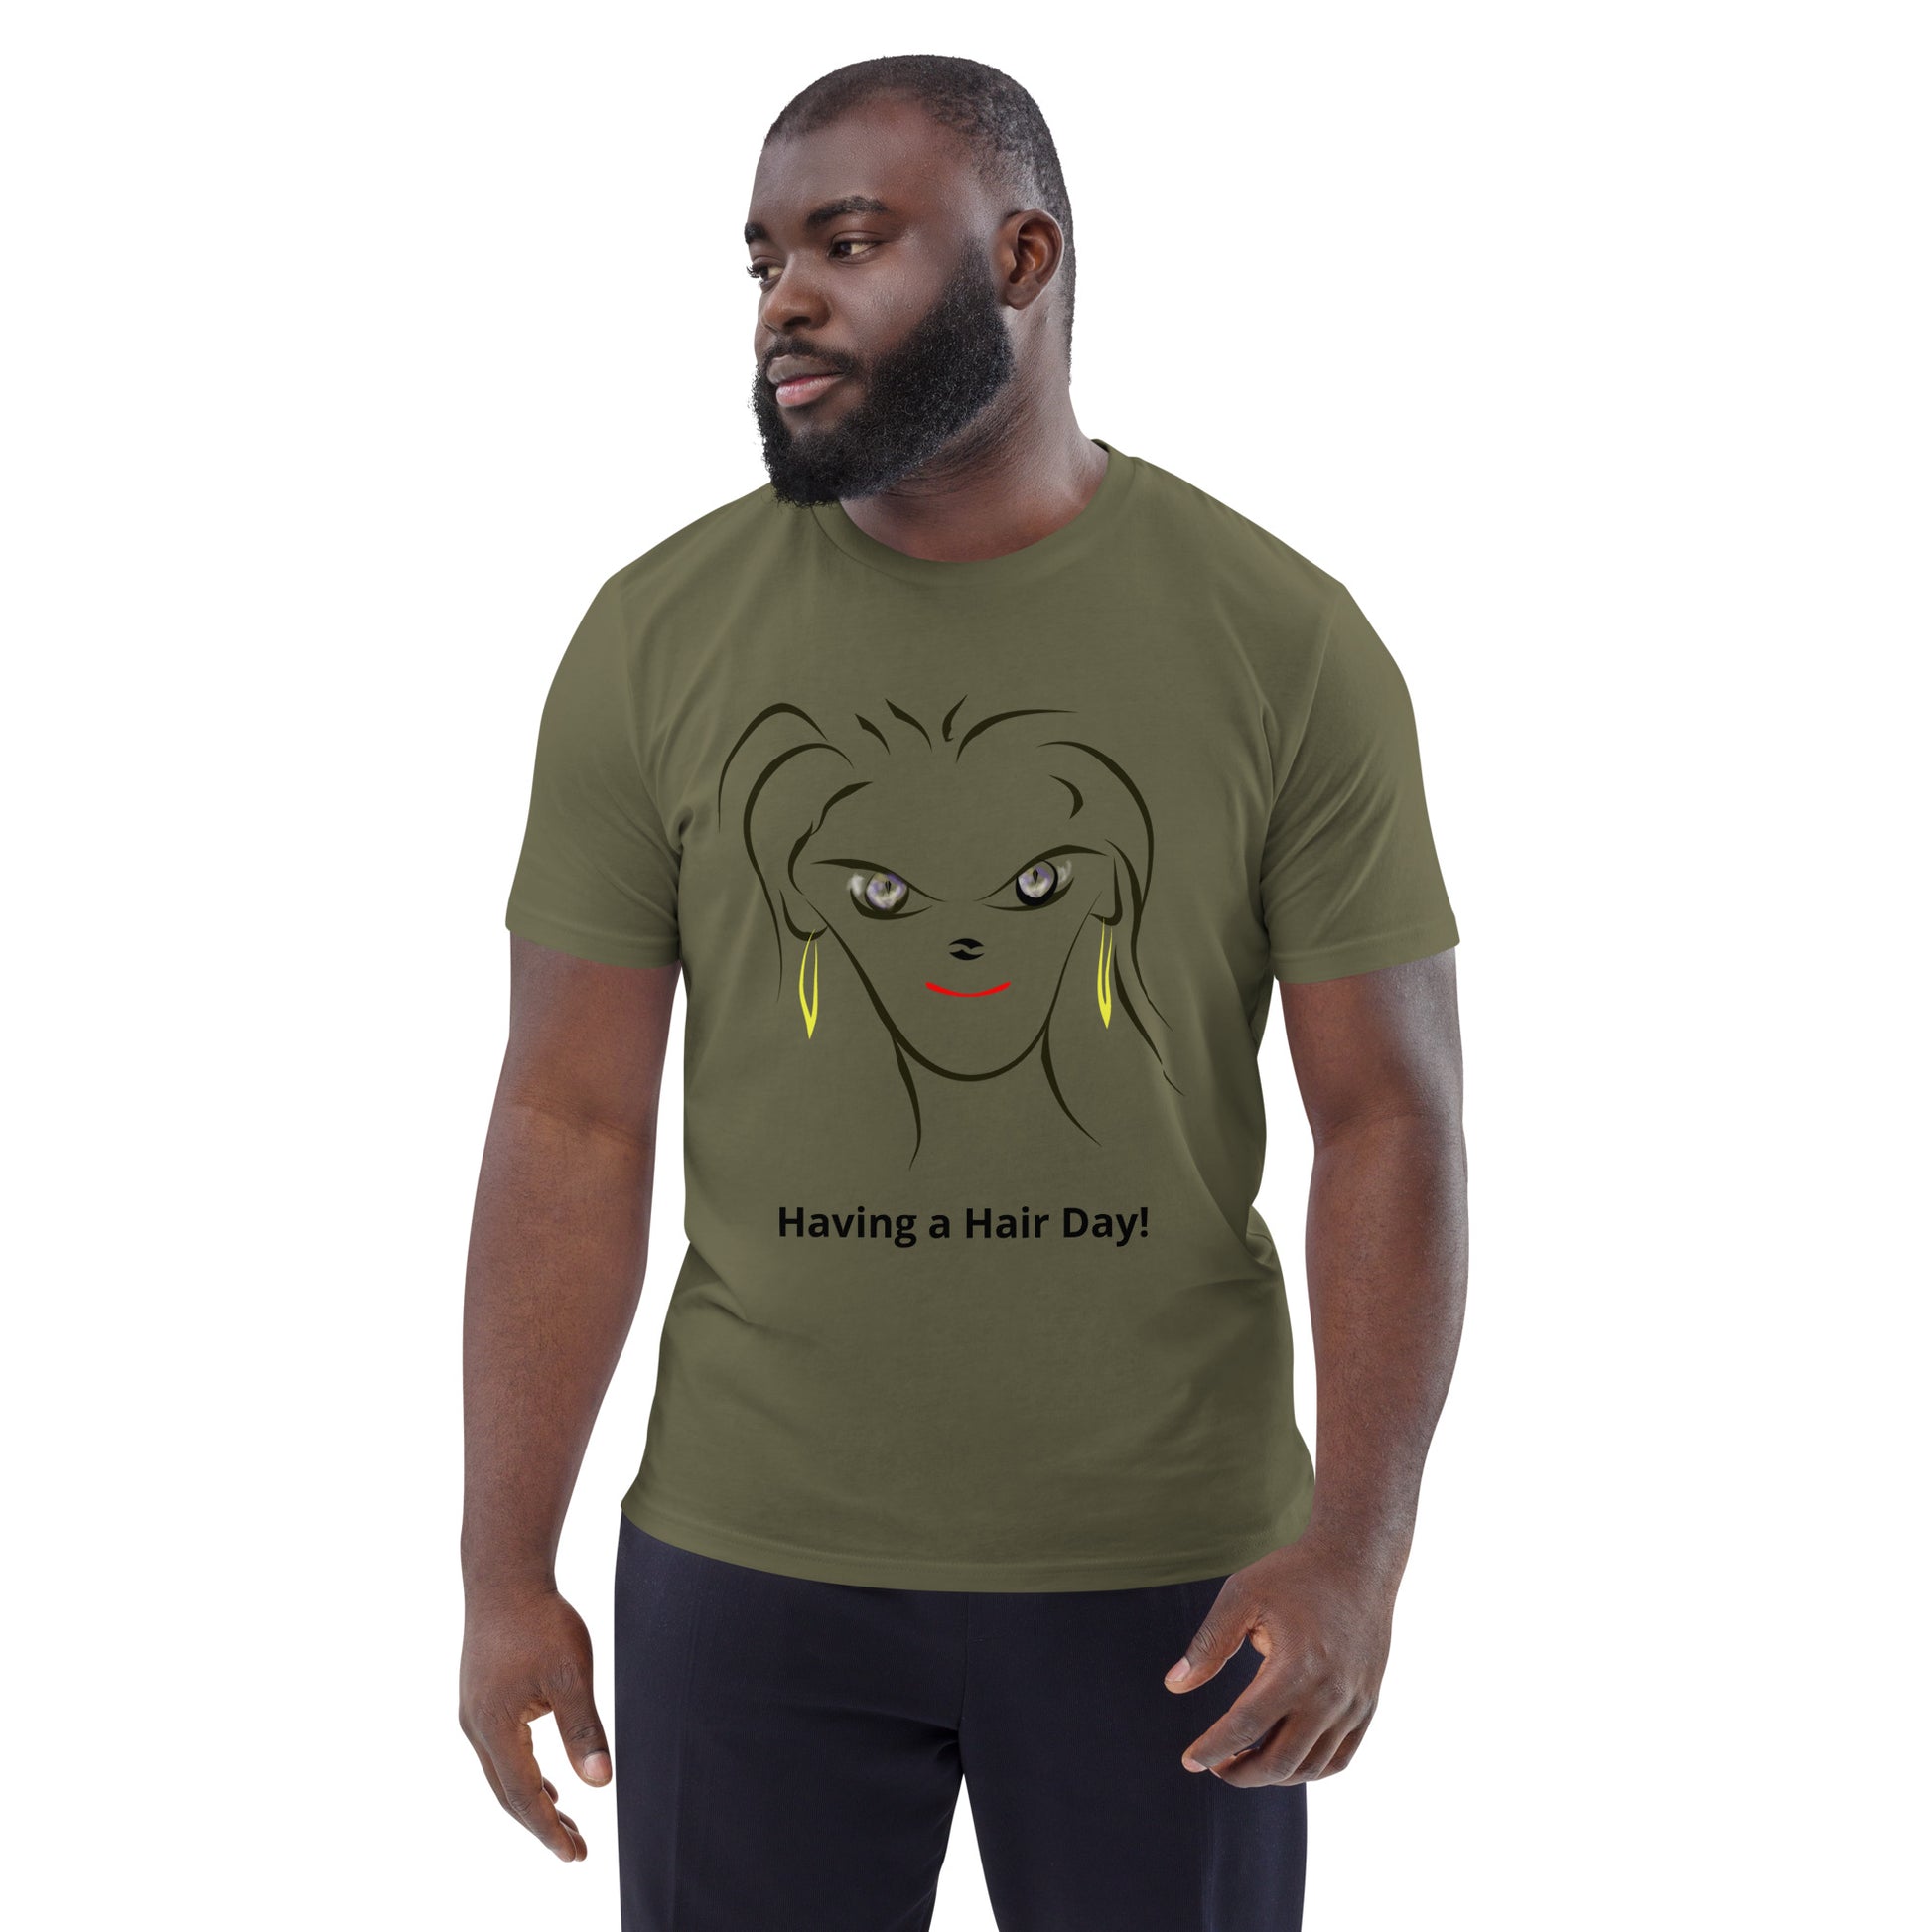 Embrace your individuality and add some fun to your wardrobe with the "Having a Hair Day!" BeSculpt Unisex Organic Cotton T-shirt – because sometimes, it's okay to embrace the chaos and rock that messy hair with pride!